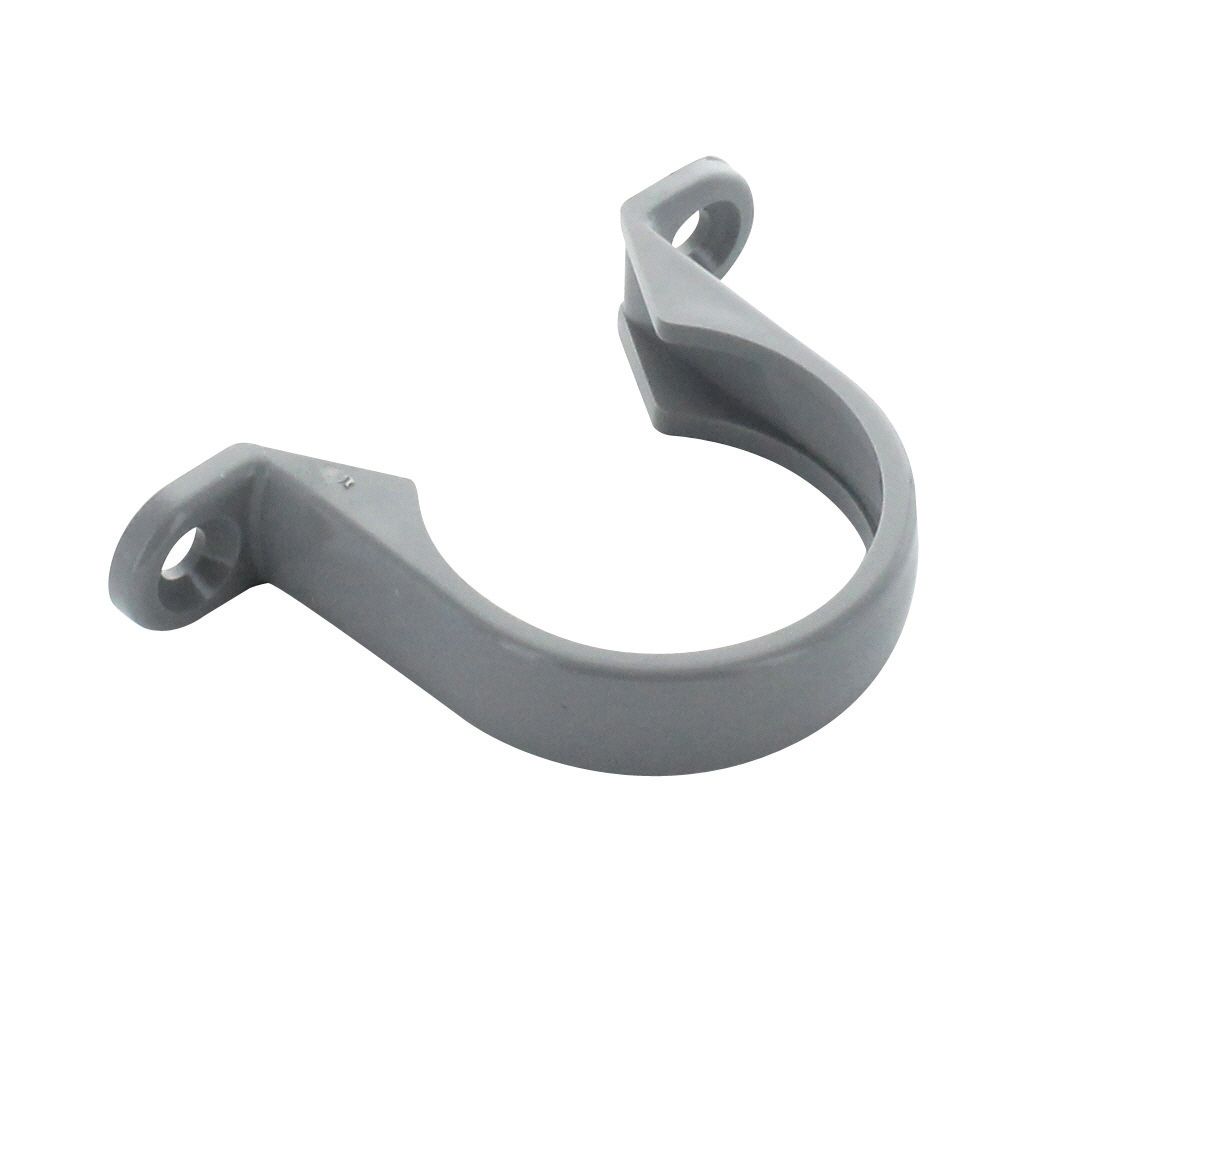 FloPlast WS35G Solvent Weld Waste Pipe Clips - Grey 40mm Pack of 3